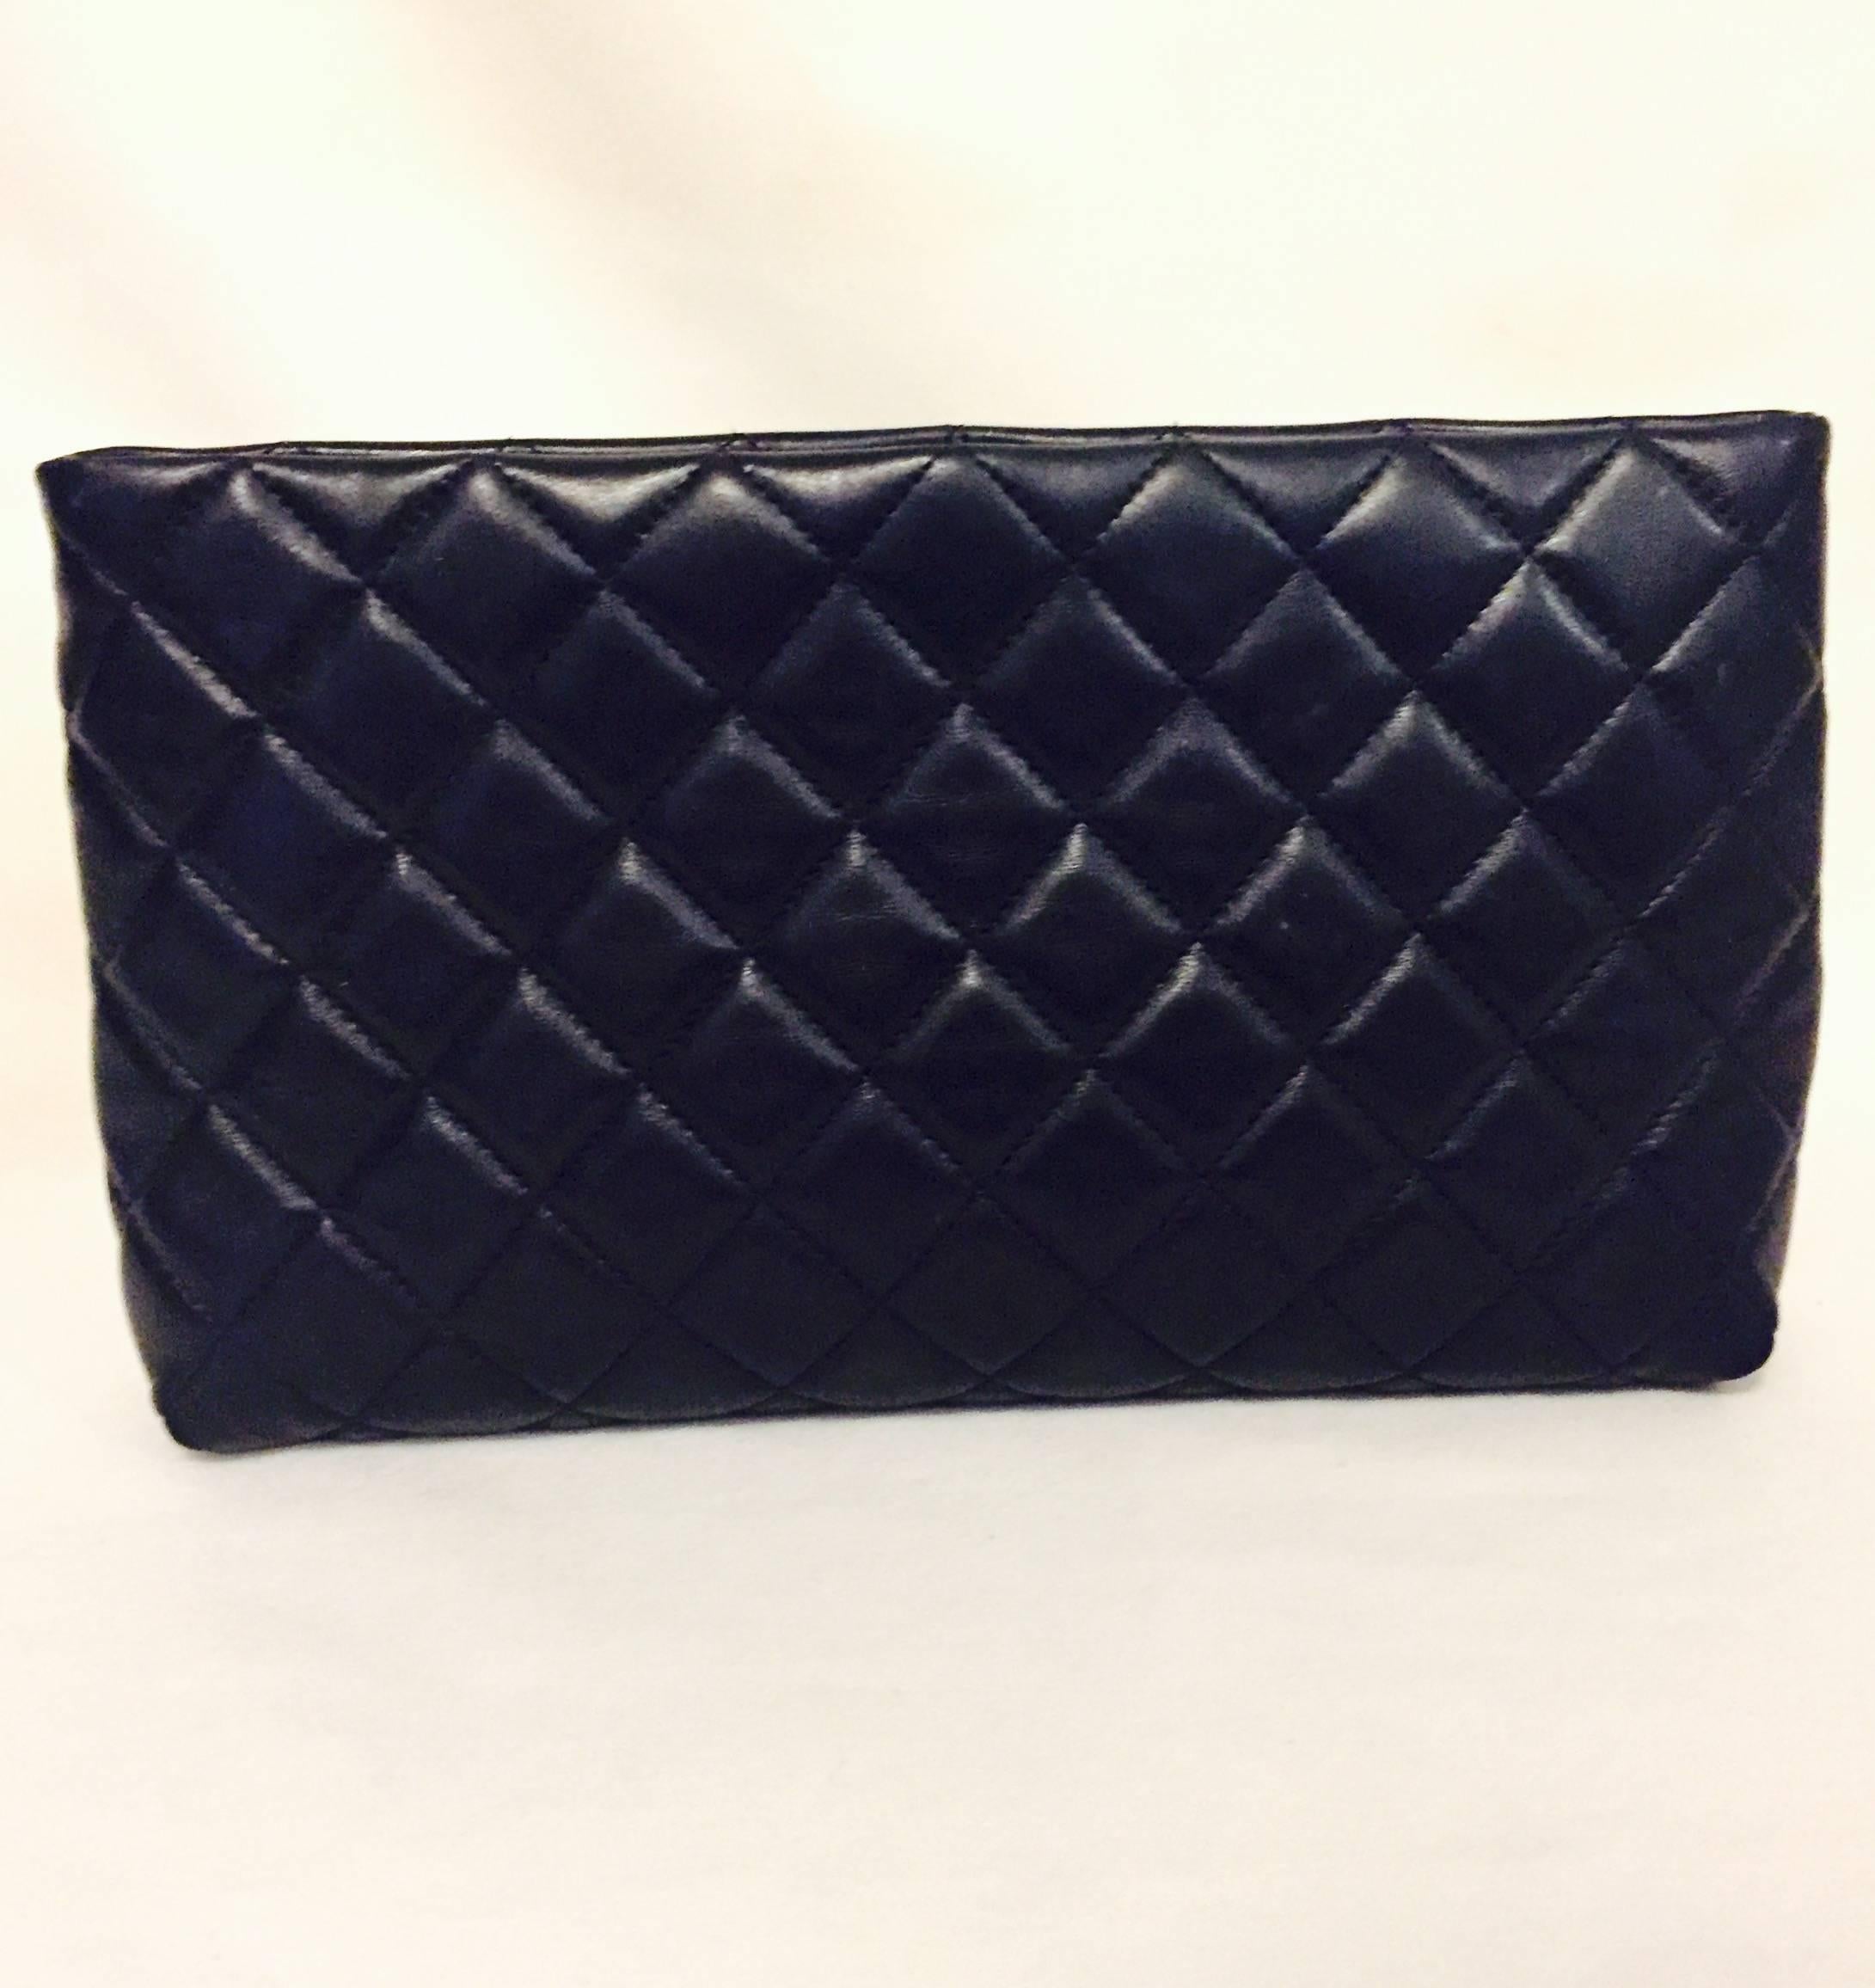 A timeless classic Chanel black quilted lambskin clutch with signature double CC lock in silver tone on top for closure.   This small clutch has only one middle compartment with no pockets and is lined in suede leather.  Excellent pre-loved